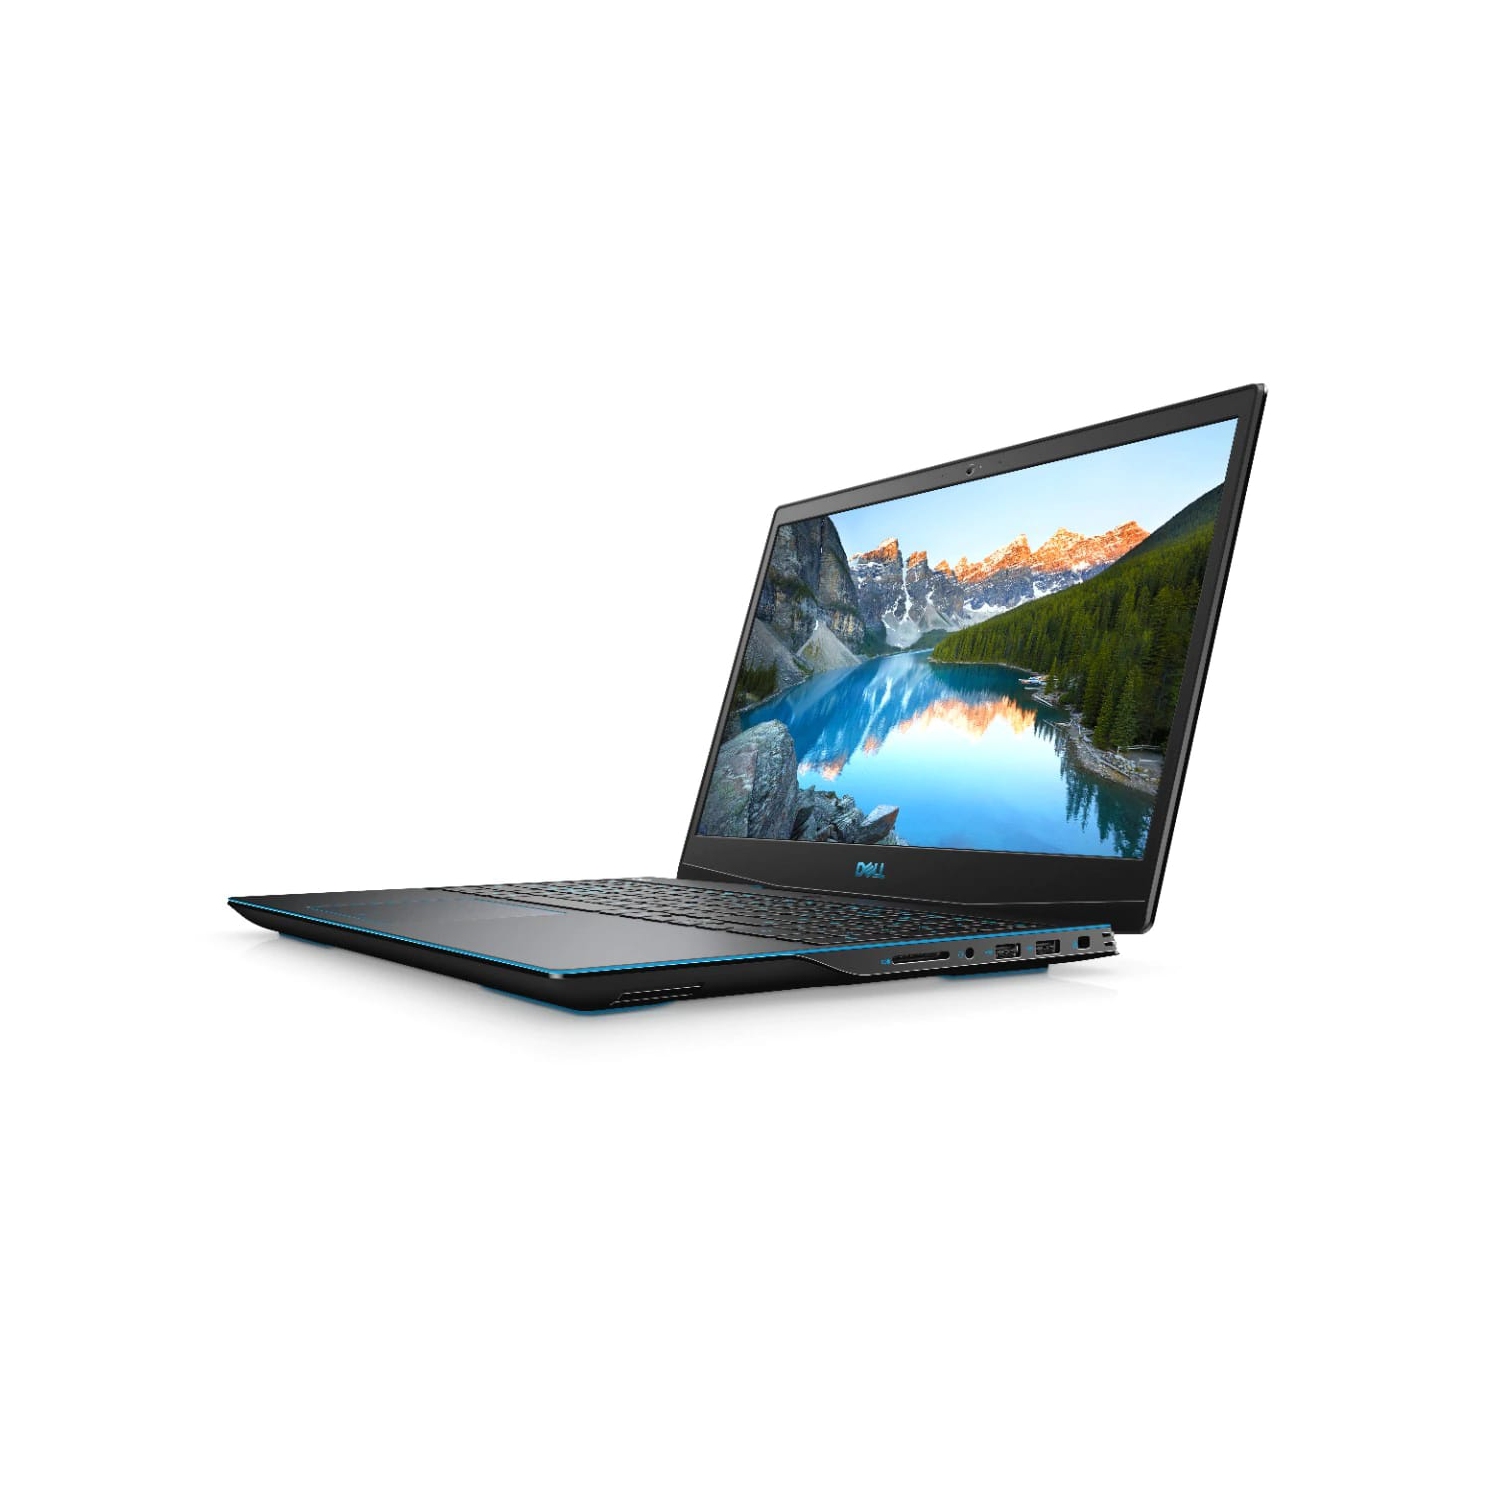 Refurbished (Excellent) – Dell G3 3500 Gaming Laptop (2020) | 15.6" FHD | Core i5 - 512GB SSD - 32GB RAM - 1650 Ti | 4 Cores @ 4.5 GHz - 10th Gen CPU